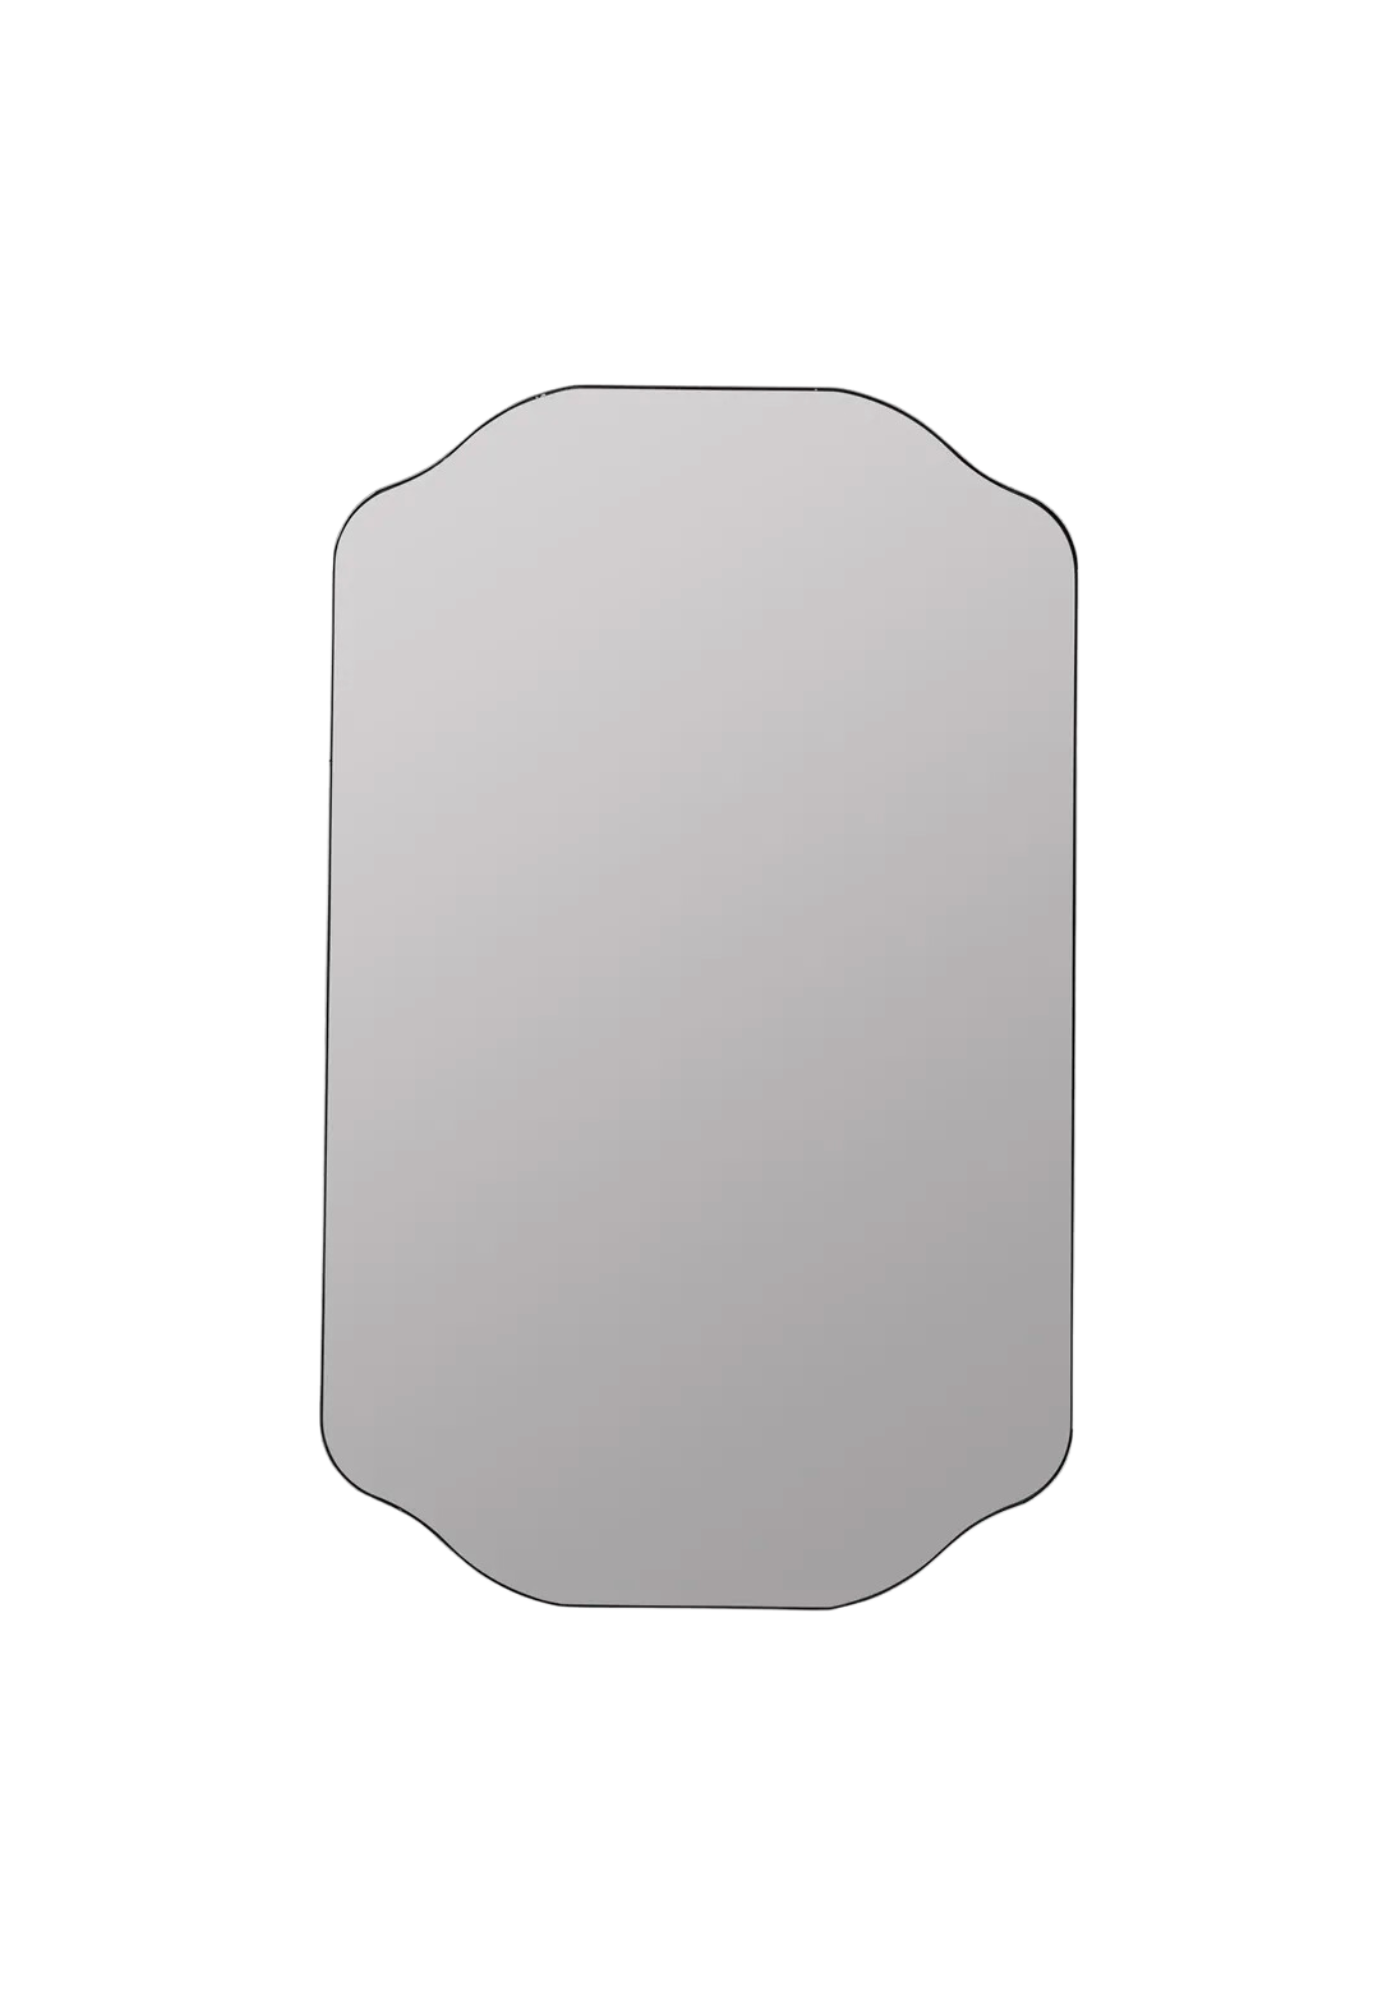 Metal Curved Oval Mirror